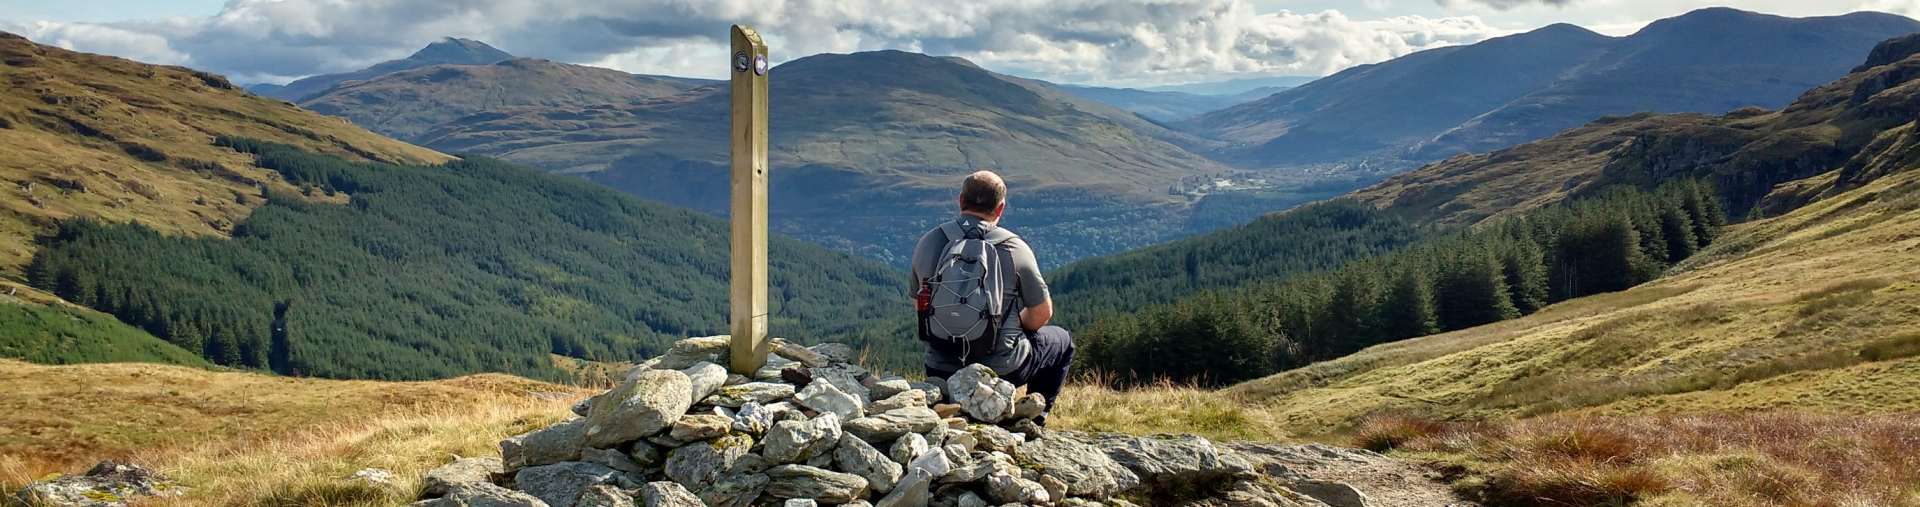 A walker sits at a waymarker overlooking a forested valley - tranquil holidays with corporate discounts